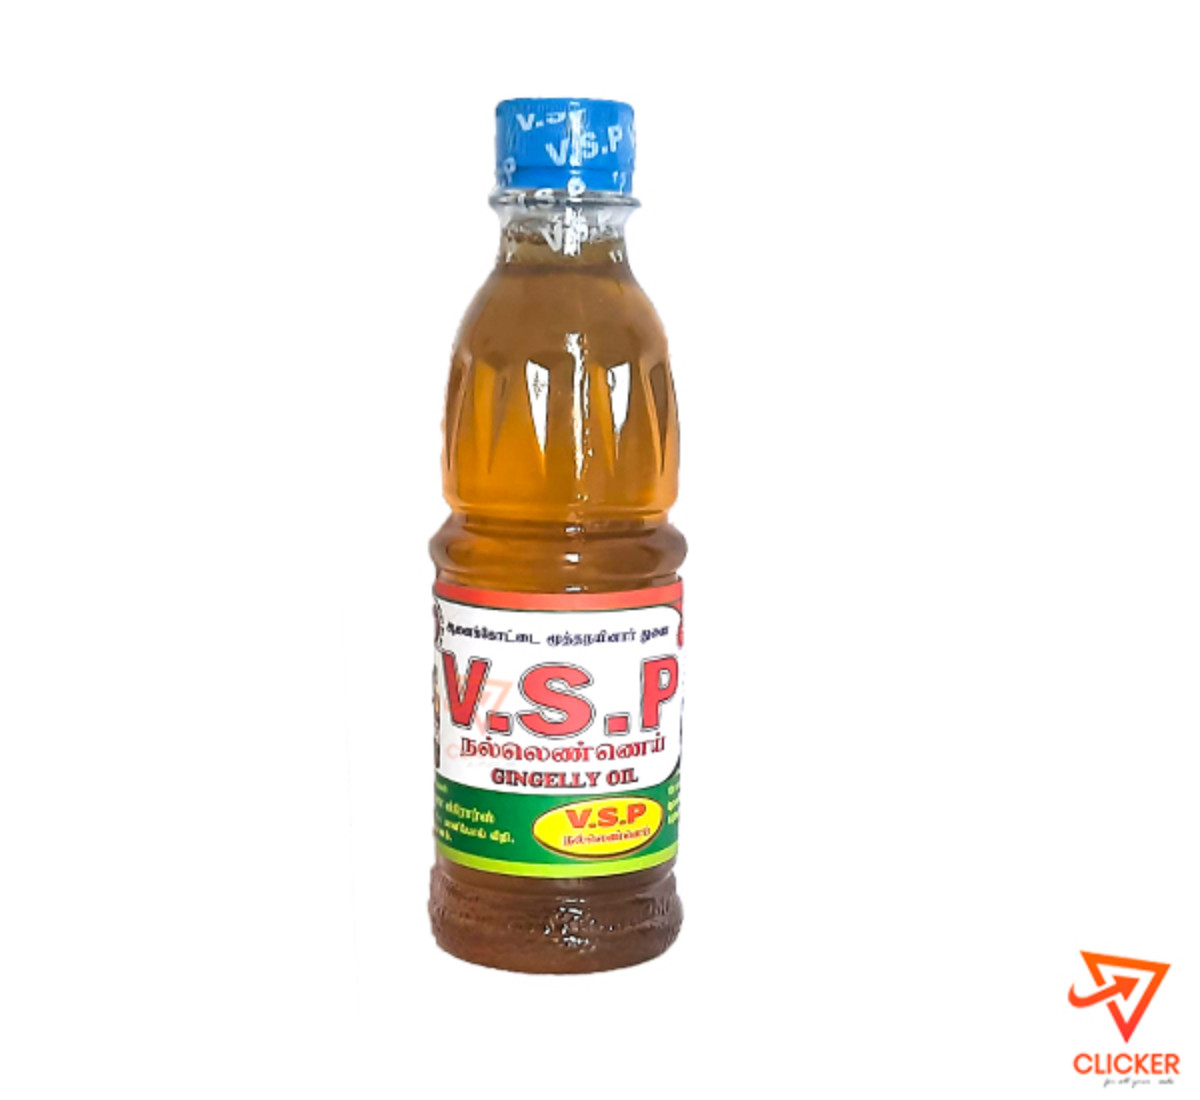 Clicker product 350ml VSP GINGELLY OIL 1183